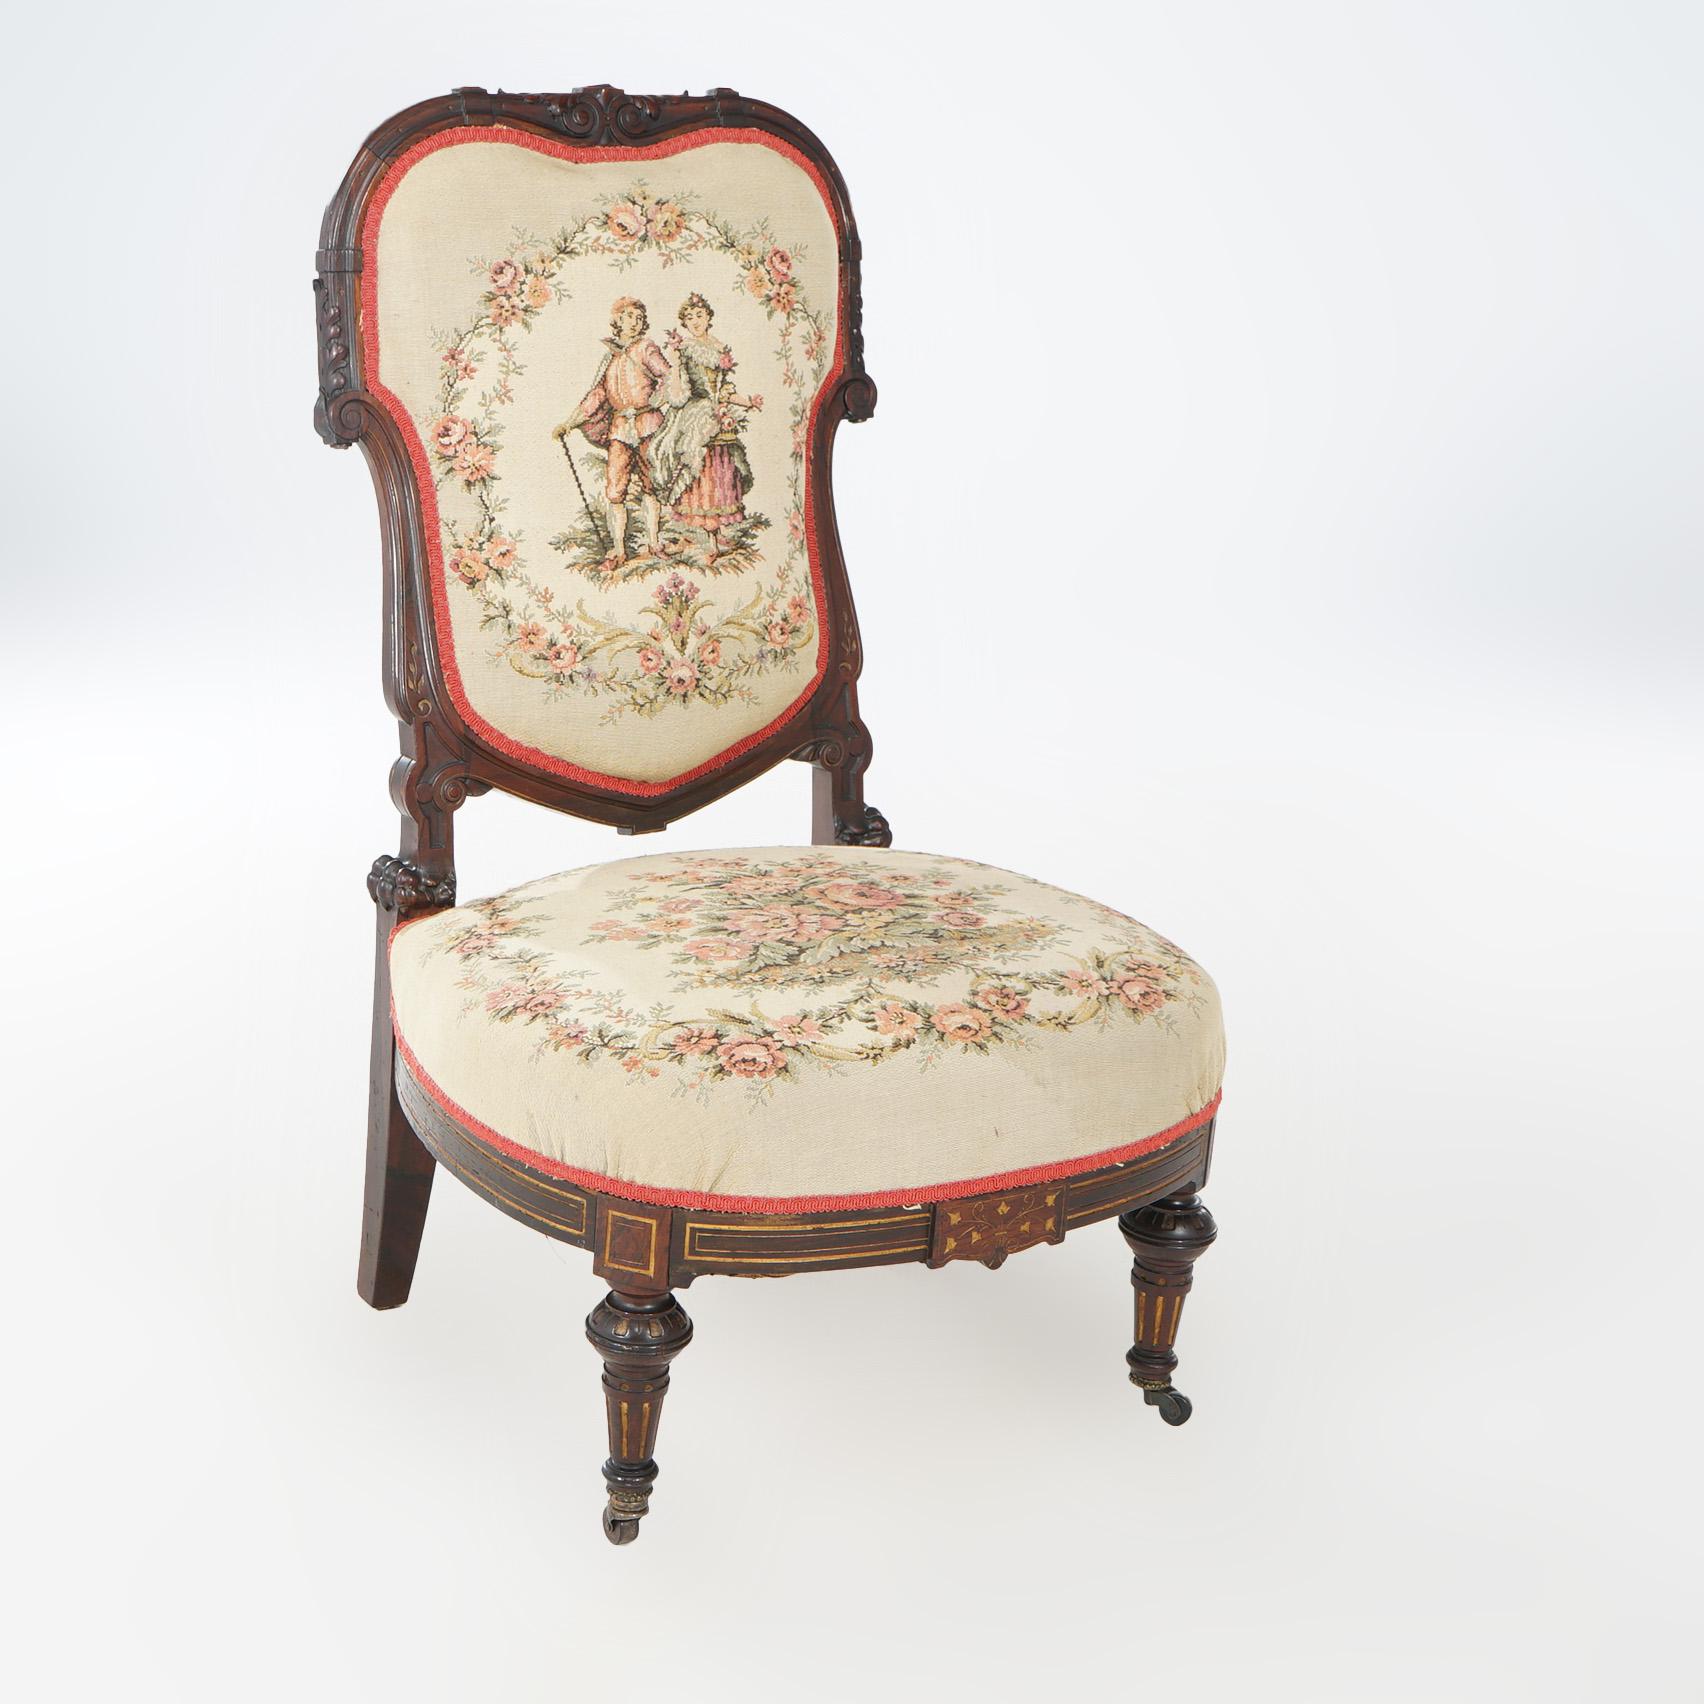 Renaissance Revival Antique Victorian Rosewood & Gilt Incised Tapestry Slipper Chair, 19th Century